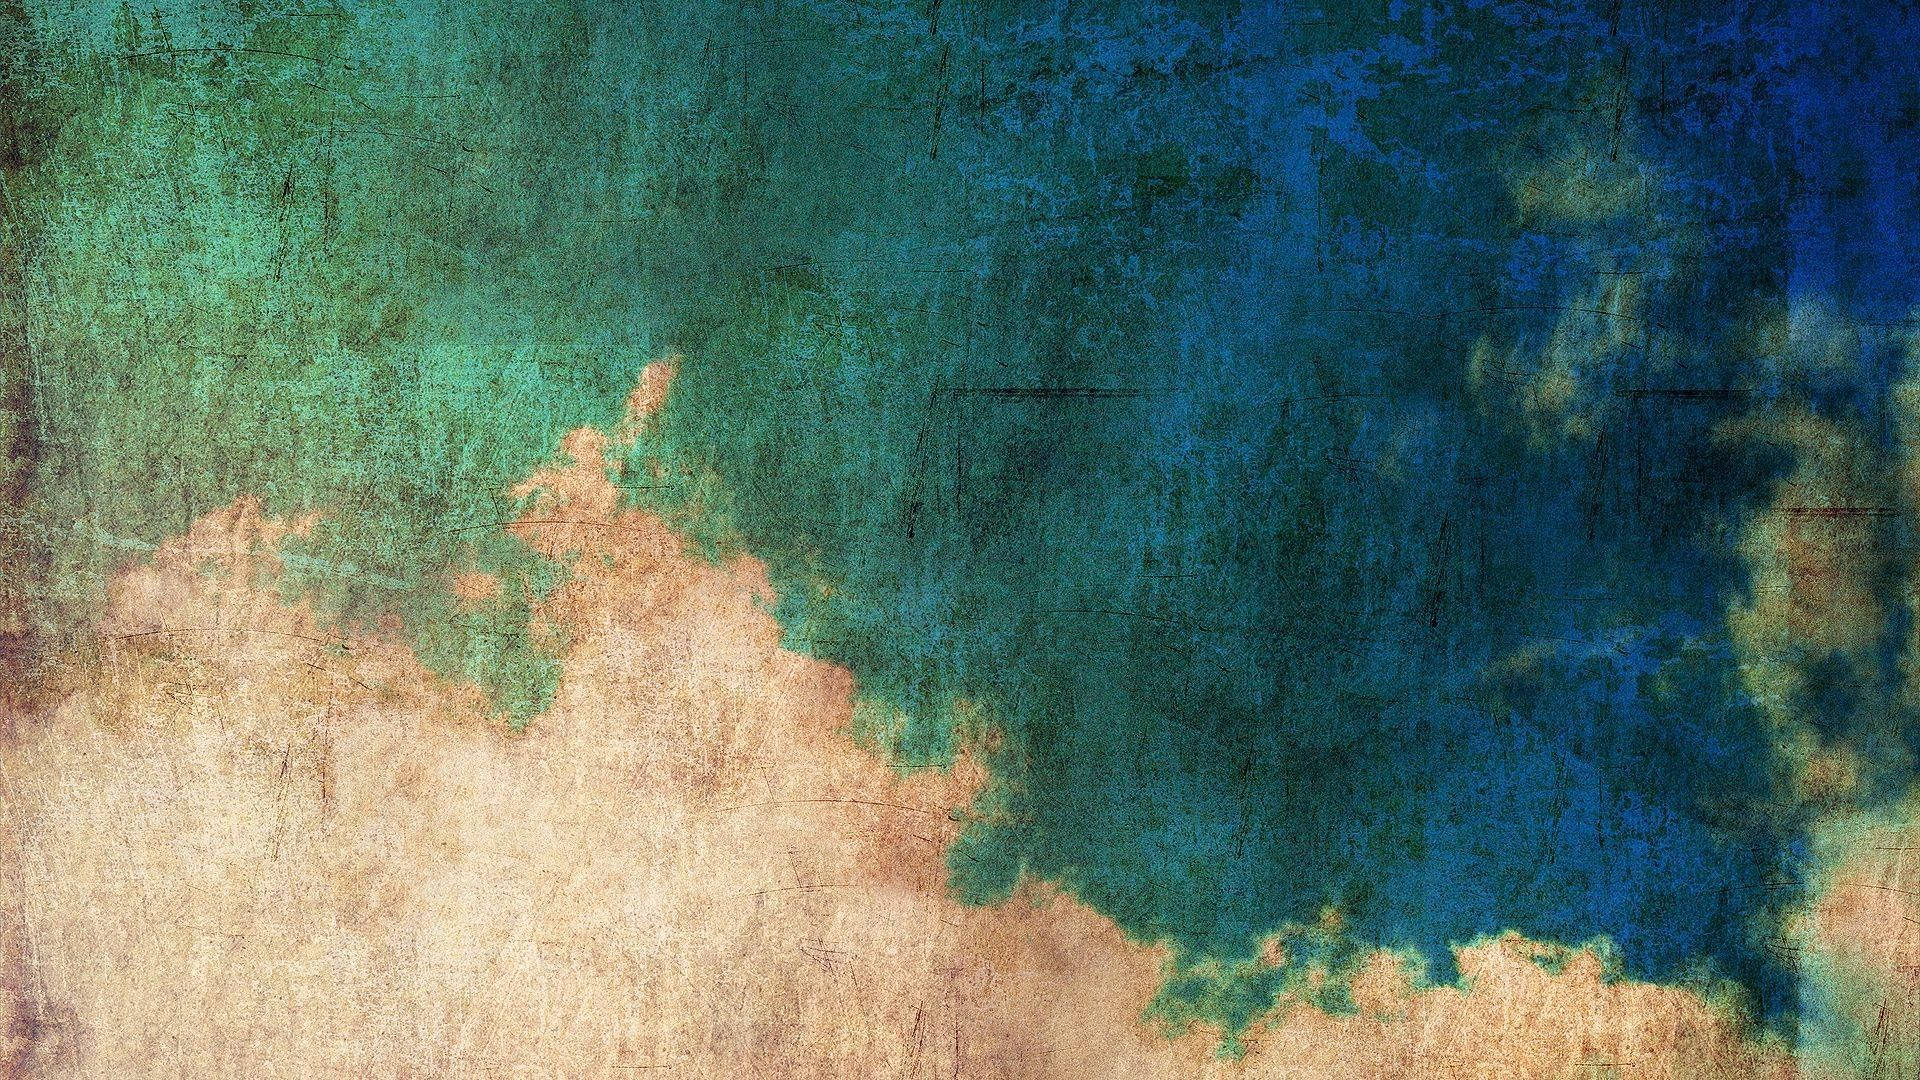 Faded Blue And Brown Paper Vintage Aesthetic Laptop Background